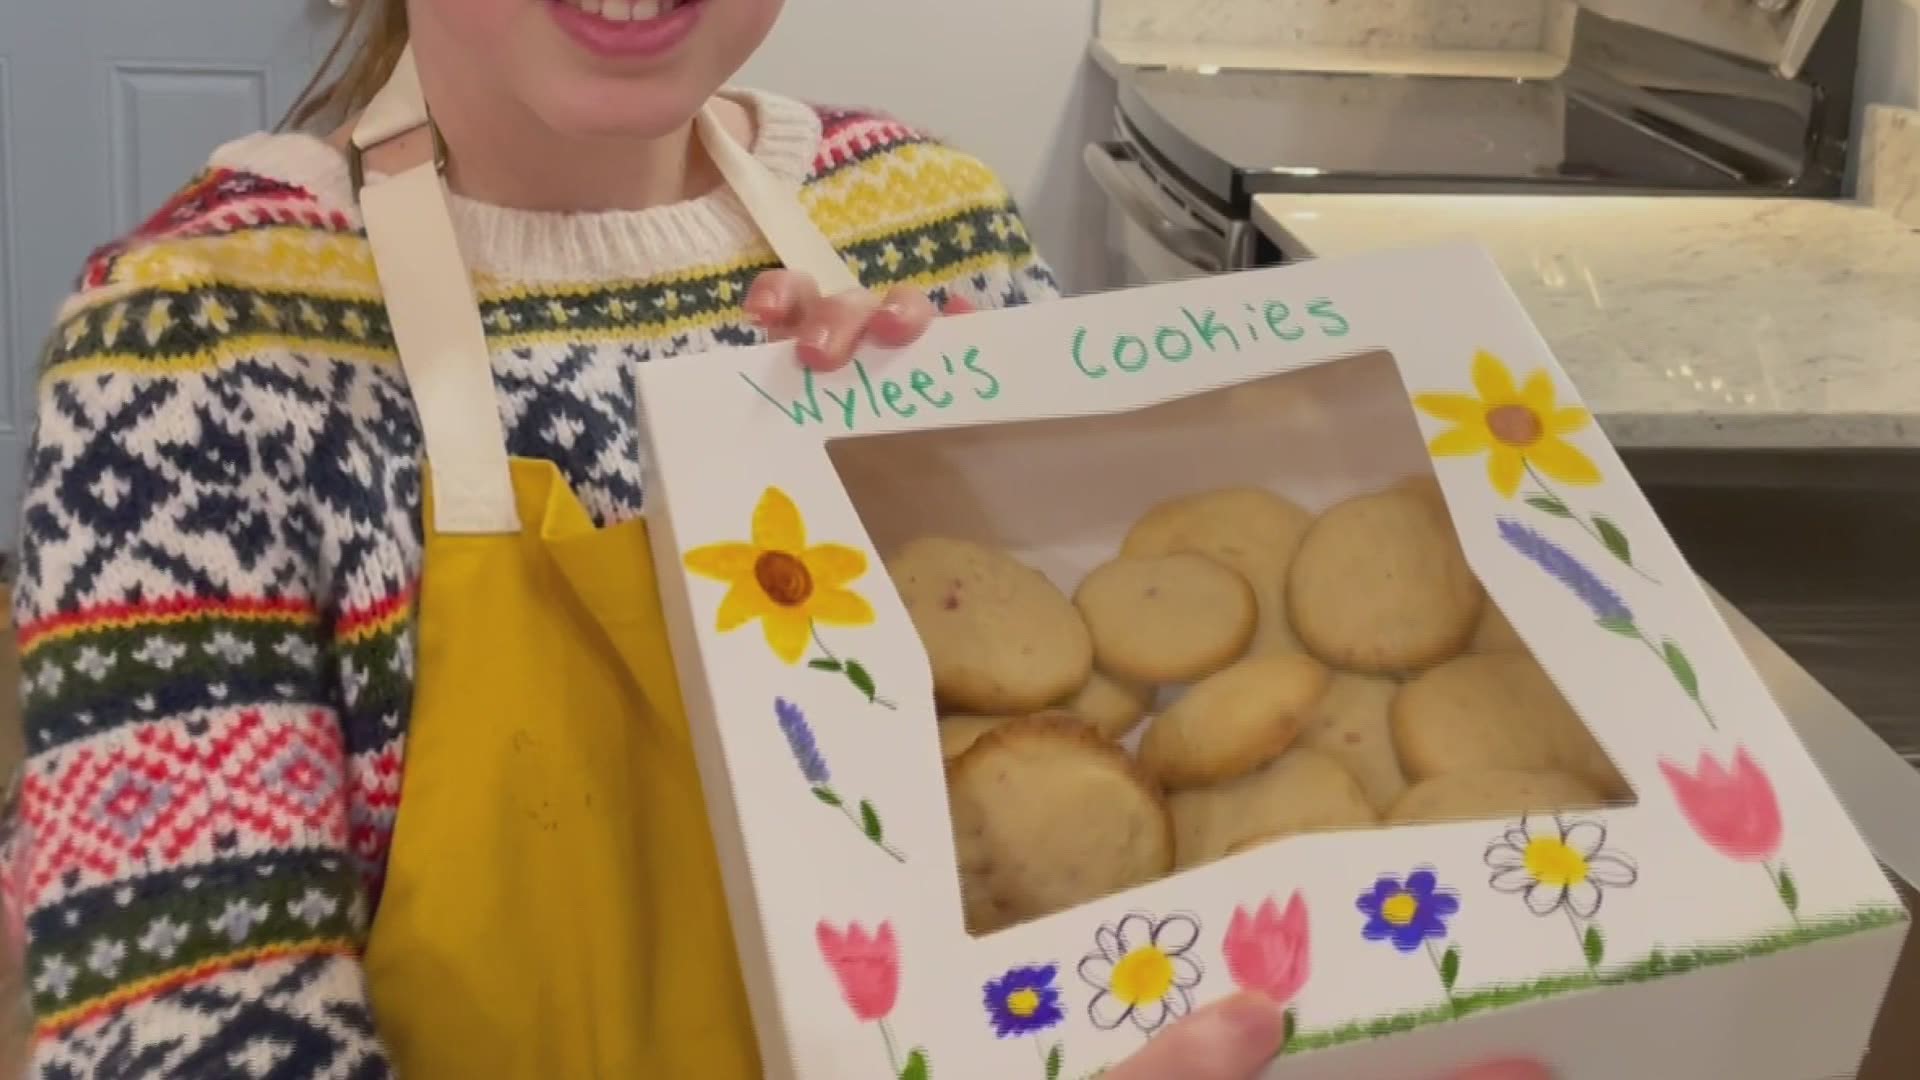 Wylee creates her own recipes, and these cookies are family favorites.